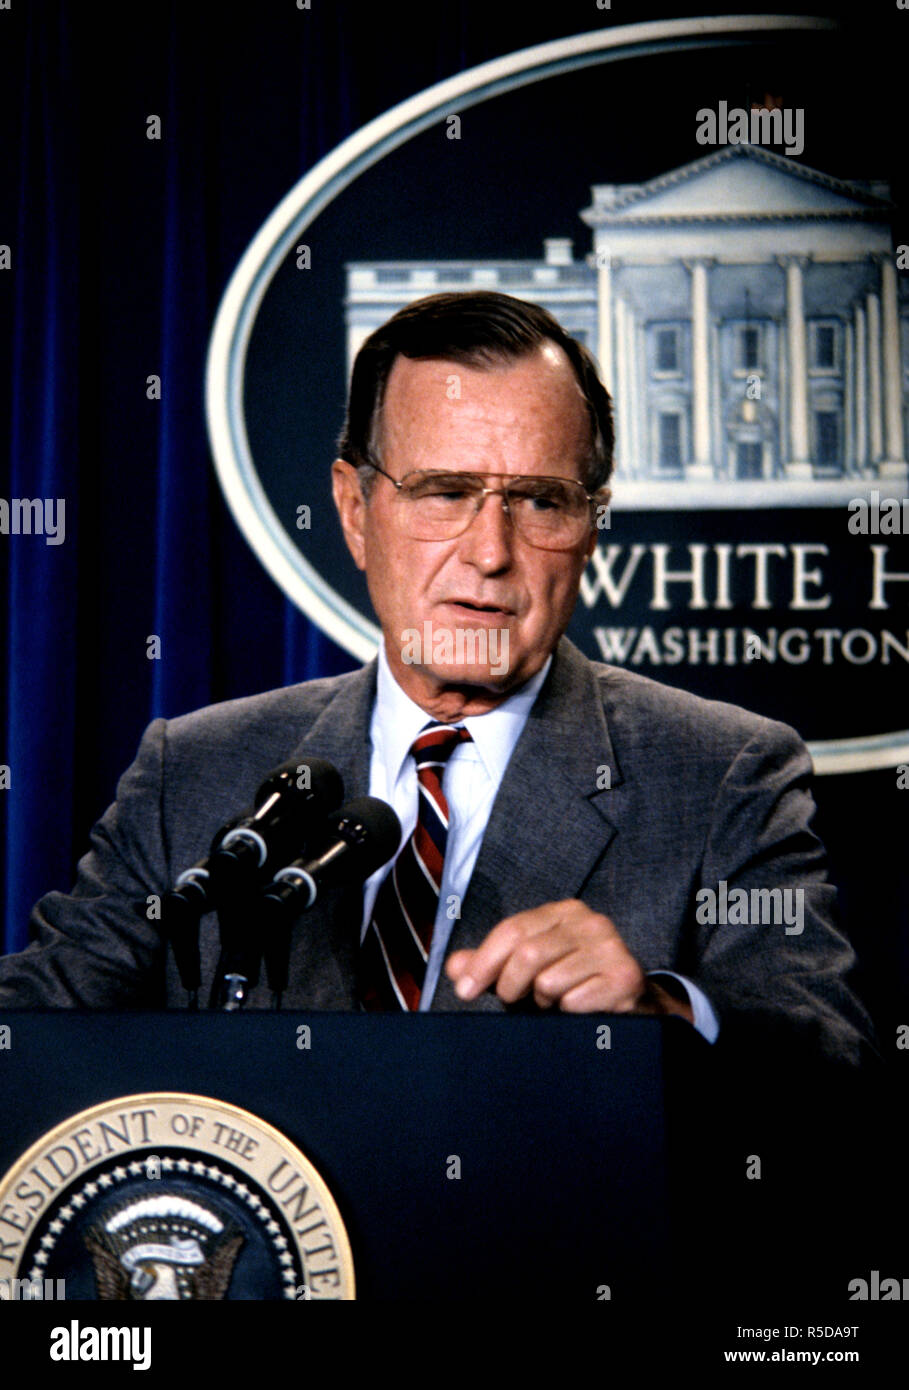 ***FILE PHOTO*** George H.W. Bush Has Passed Away United States President George H.W. Bush holds a press conference on the crisis with Iraq in the Brady Press Briefing Room at the White House in Washington, DC on August 17, 1990. Credit: Howard L. Sachs/CNP /MediaPunch Credit: MediaPunch Inc/Alamy Live News Stock Photo